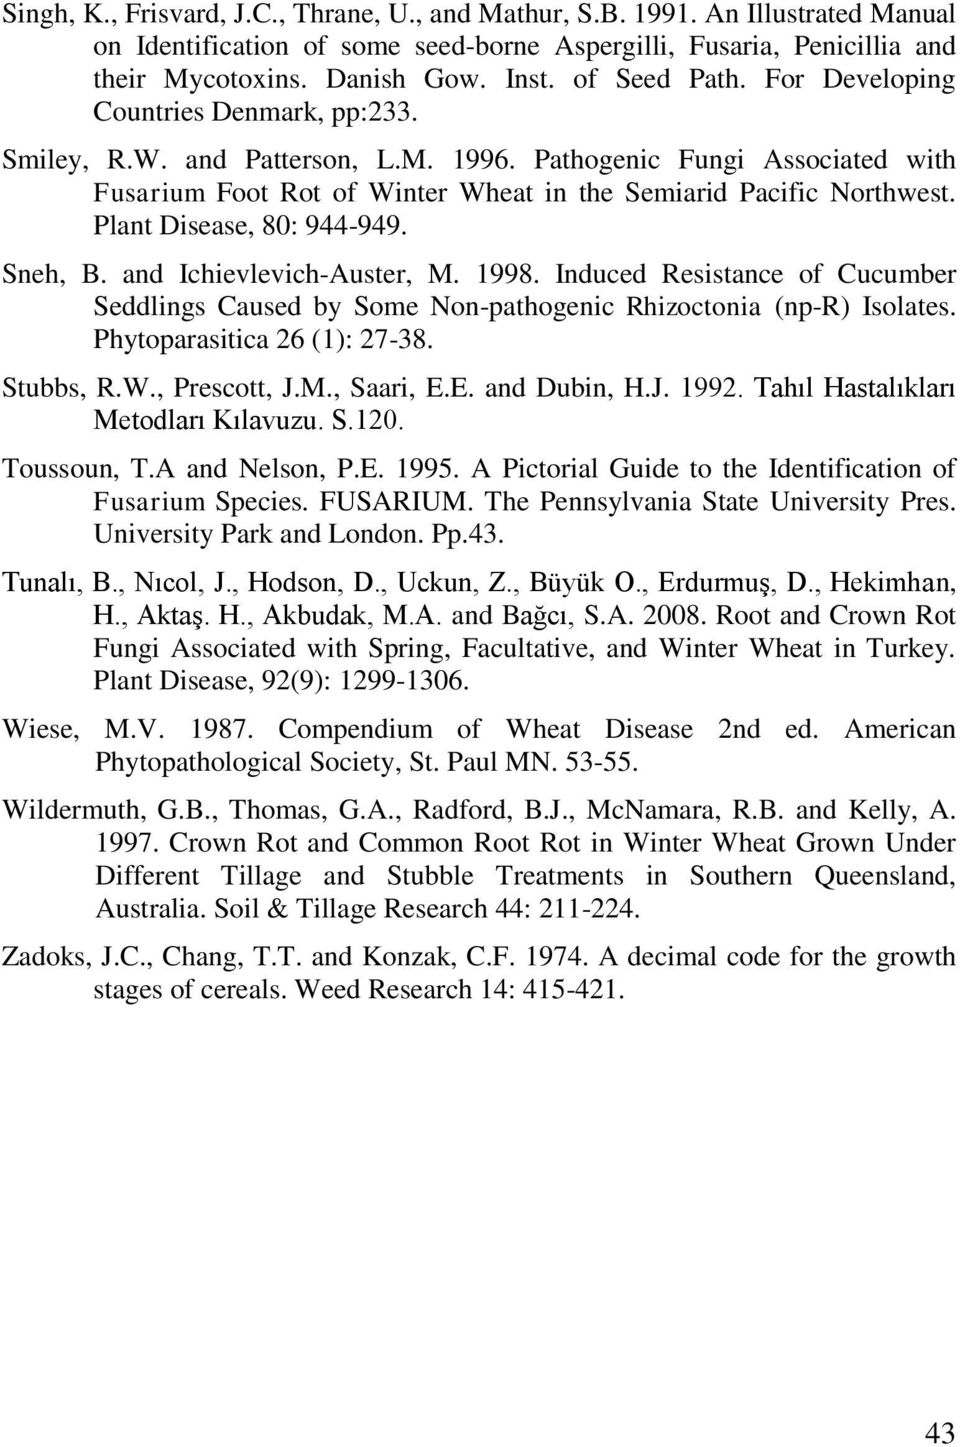 Plant Disease, 80: 944-949. Sneh, B. and Ichievlevich-Auster, M. 1998. Induced Resistance of Cucumber Seddlings Caused by Some Non-pathogenic Rhizoctonia (np-r) Isolates.